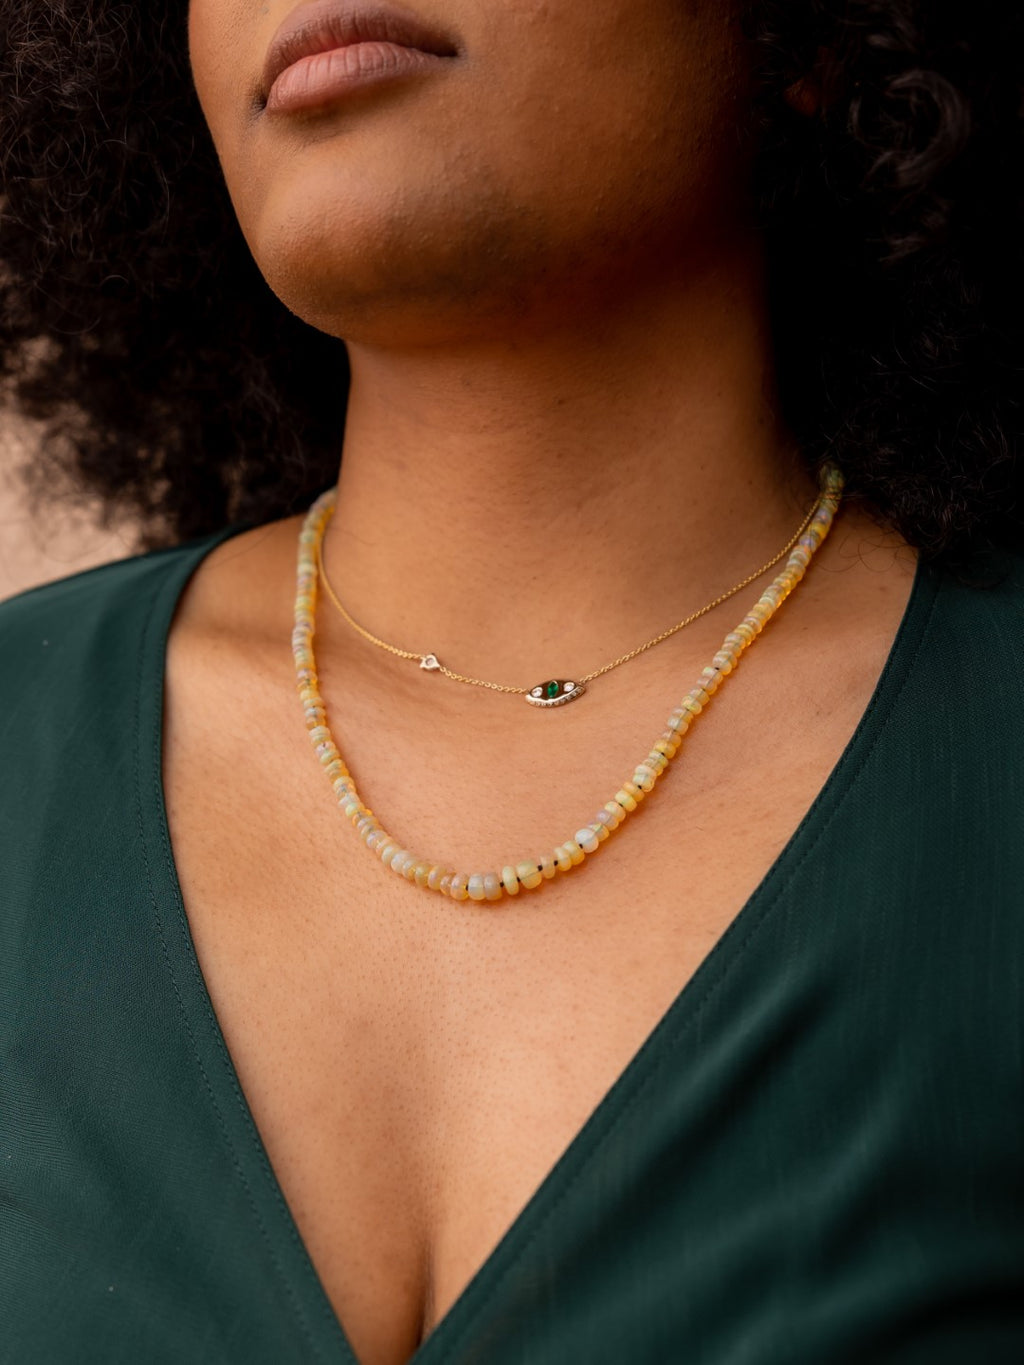 The Emerald Makeda Necklace